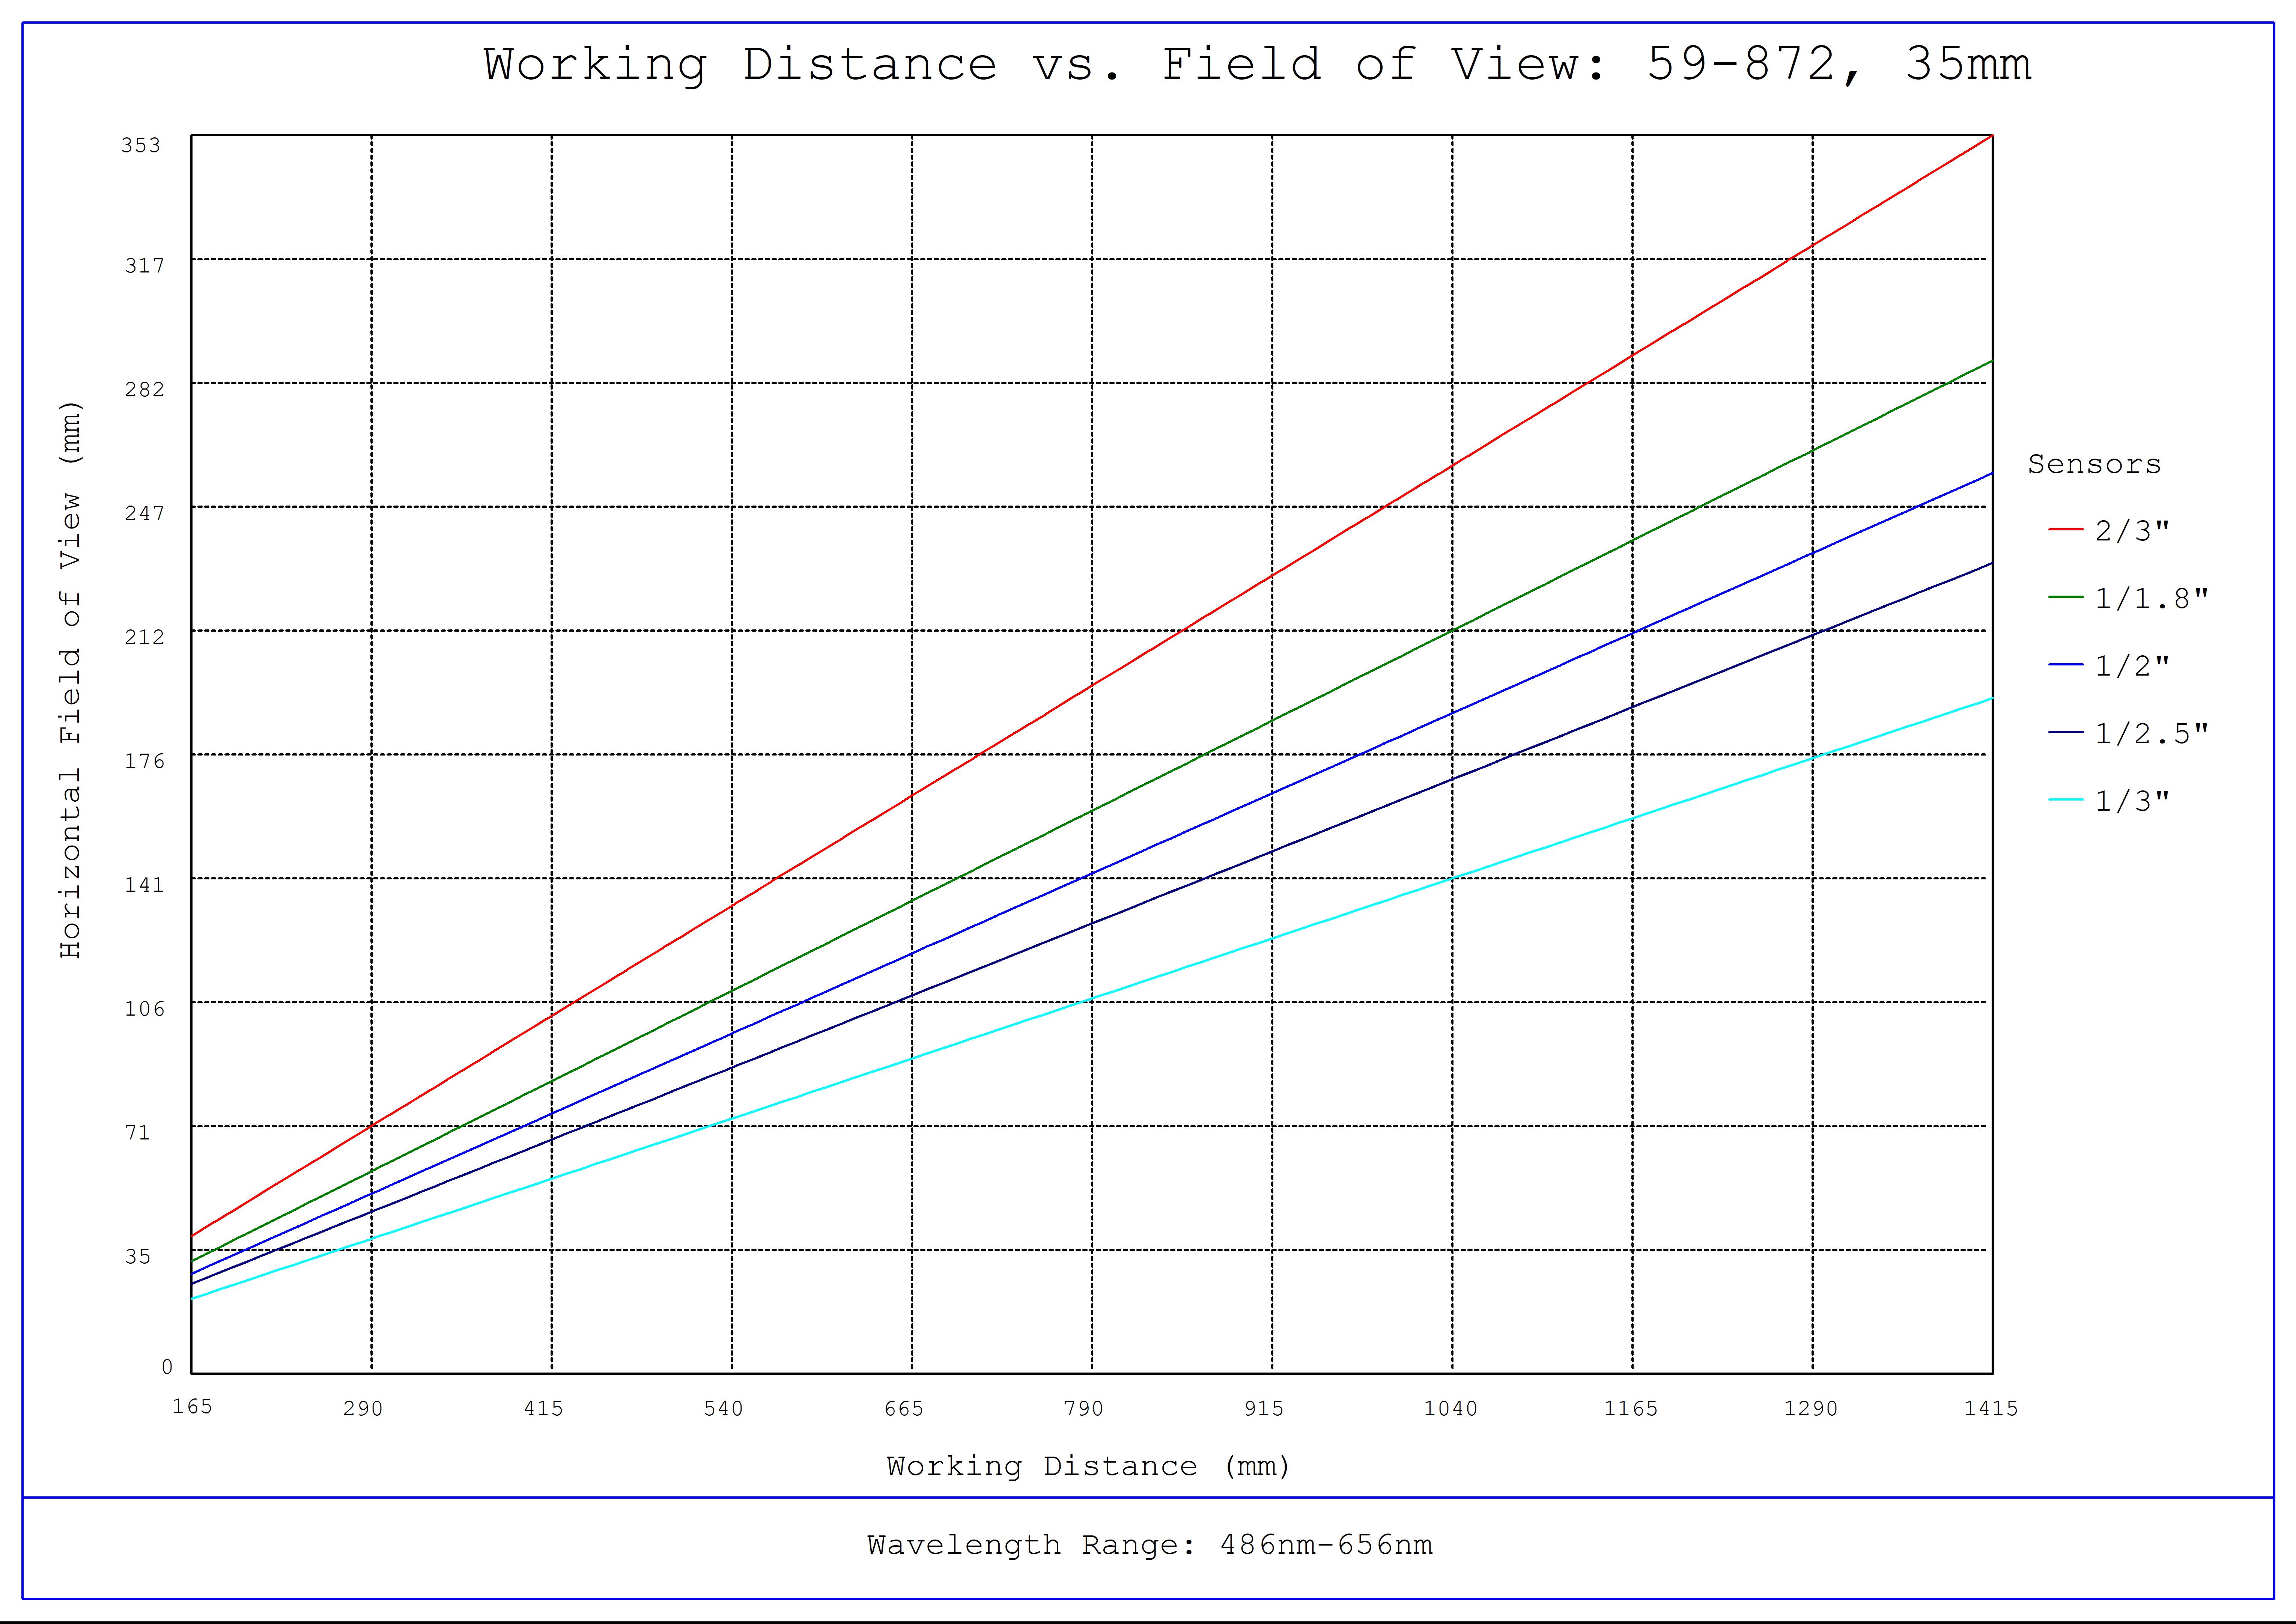 #59-872, 35mm C Series Fixed Focal Length Lens, Working Distance versus Field of View Plot